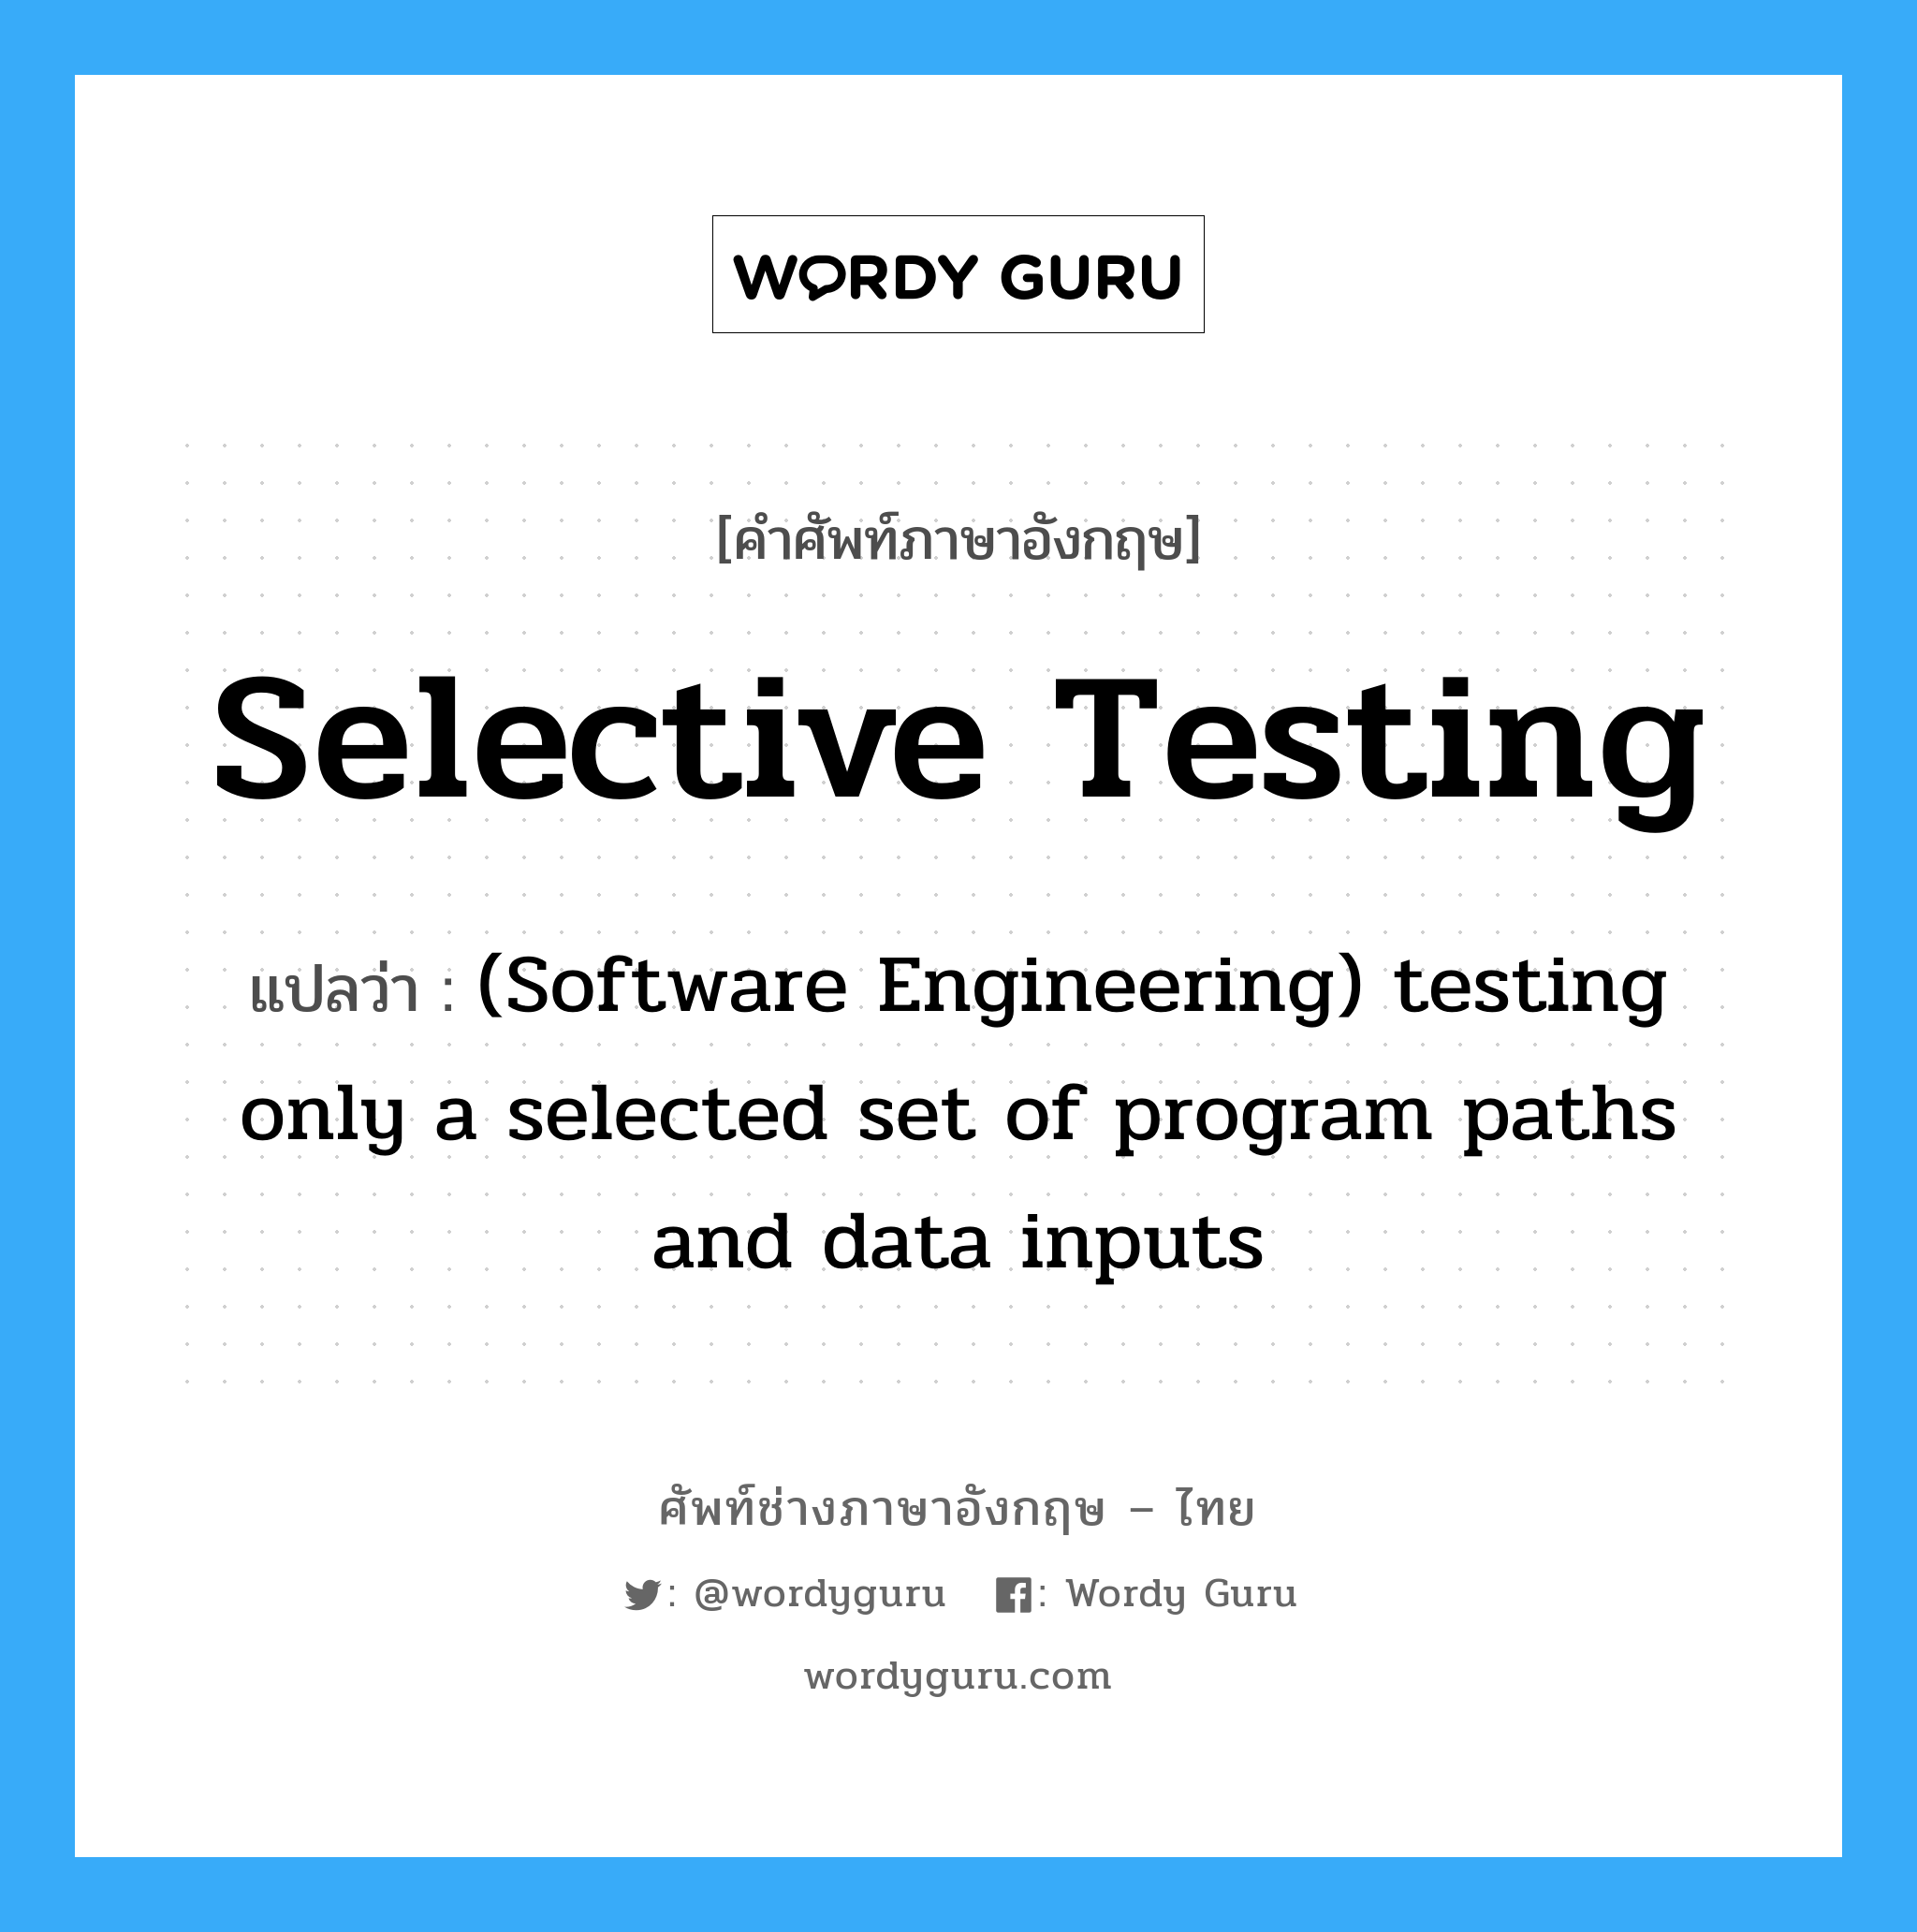 Selective testing แปลว่า?, คำศัพท์ช่างภาษาอังกฤษ - ไทย Selective testing คำศัพท์ภาษาอังกฤษ Selective testing แปลว่า (Software Engineering) testing only a selected set of program paths and data inputs